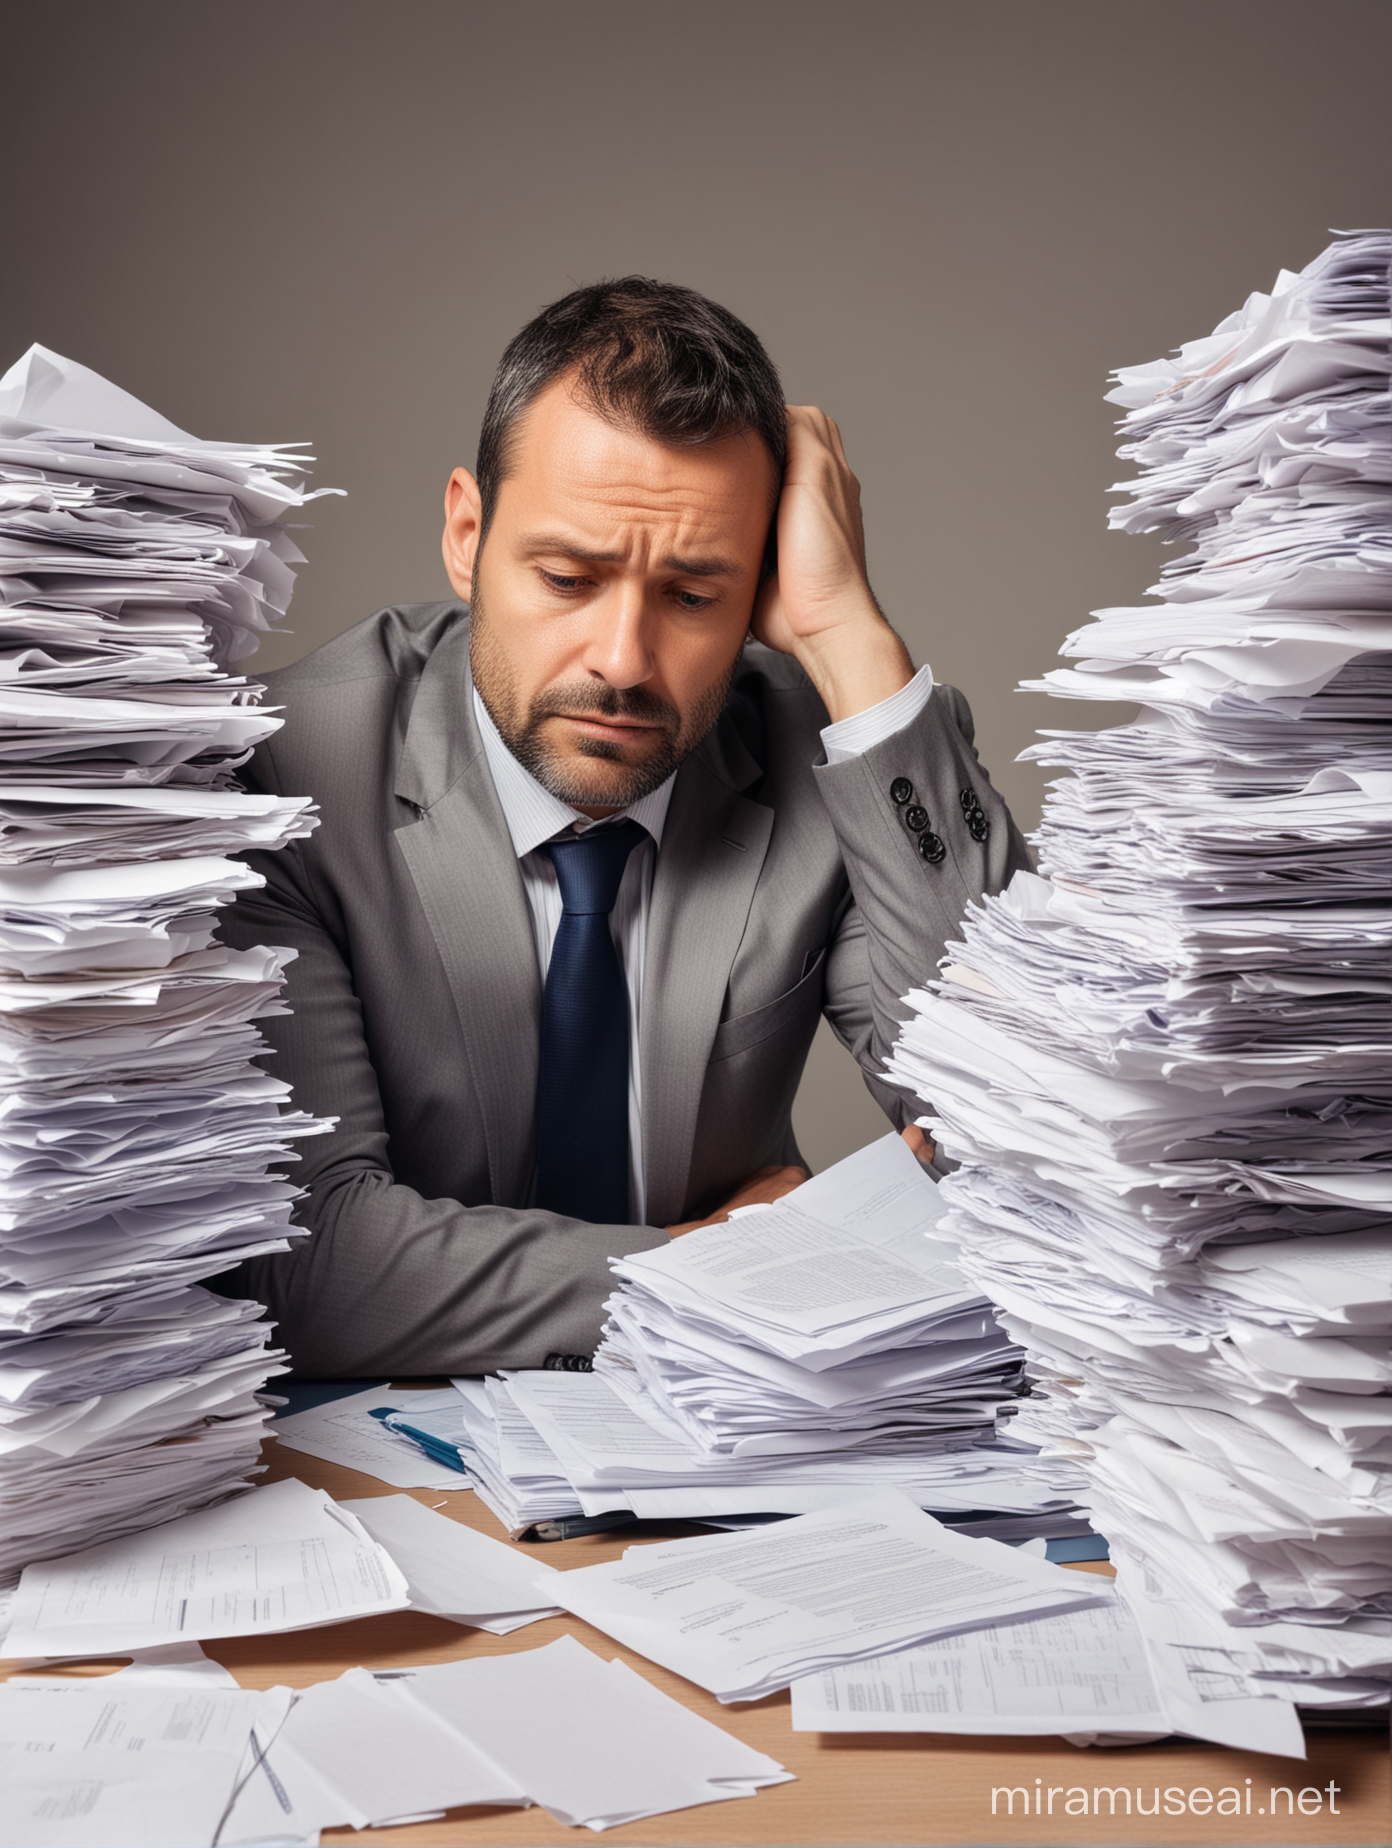 Business man, 45 years old, sitting by his desk at work with piles of papers in front of him. He is kind of sad and feeling overwhelmed